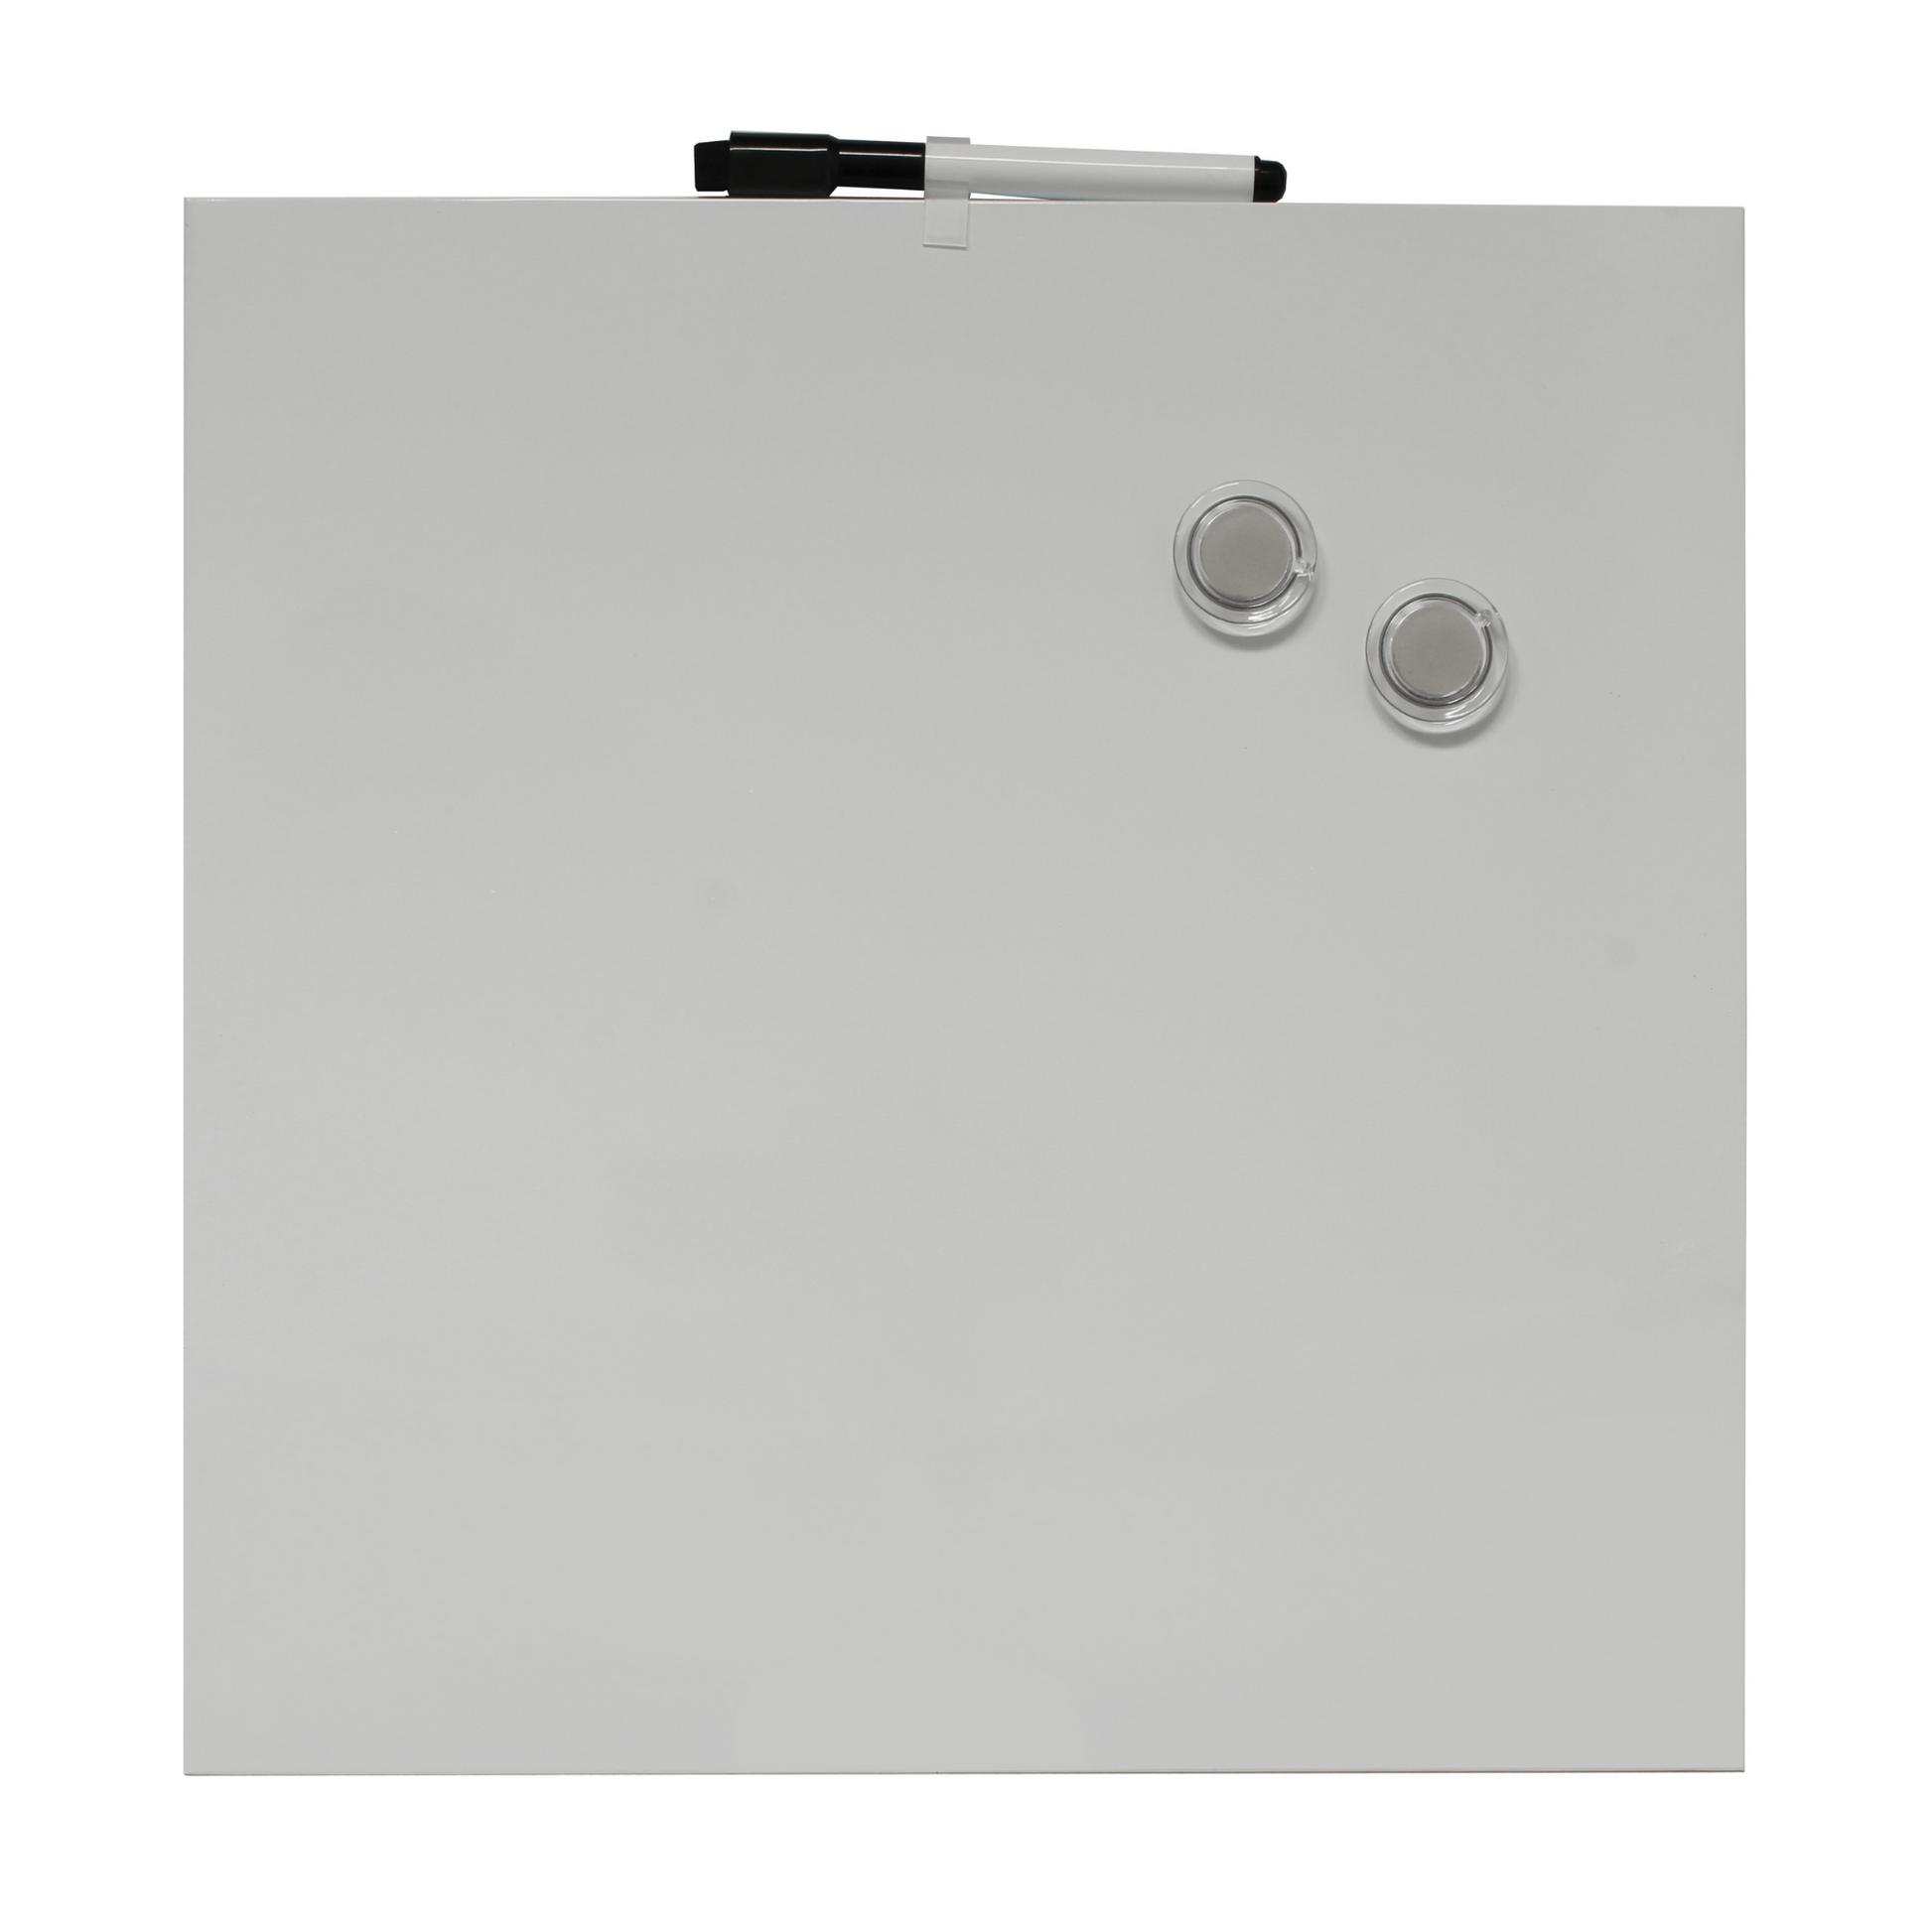 A blank frameless dry-erase board measuring 35 x 35 cm, with 2 transparent, round magnets and a marker with eraser in the lid clipped into mount at the top. The sleek, minimalist design makes it suitable for quick notes or reminders in a home, school, or office setting.